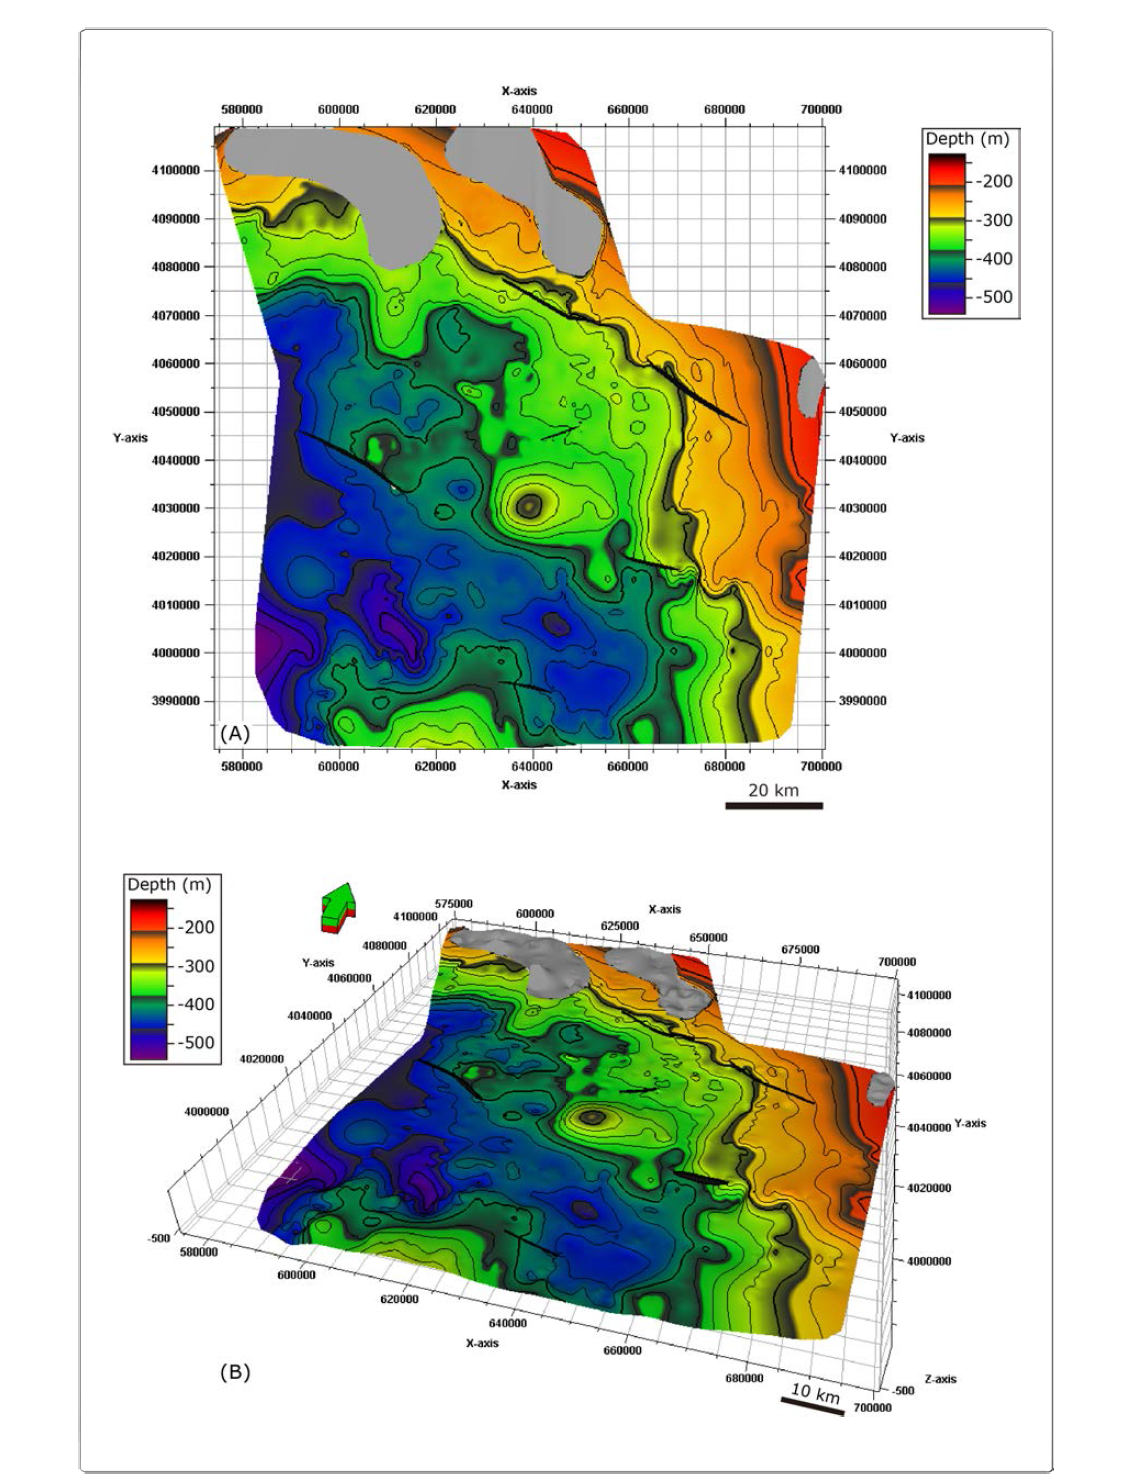 Depth structure of H1 in the Kunsan Basin. The contour interval is 50 m.